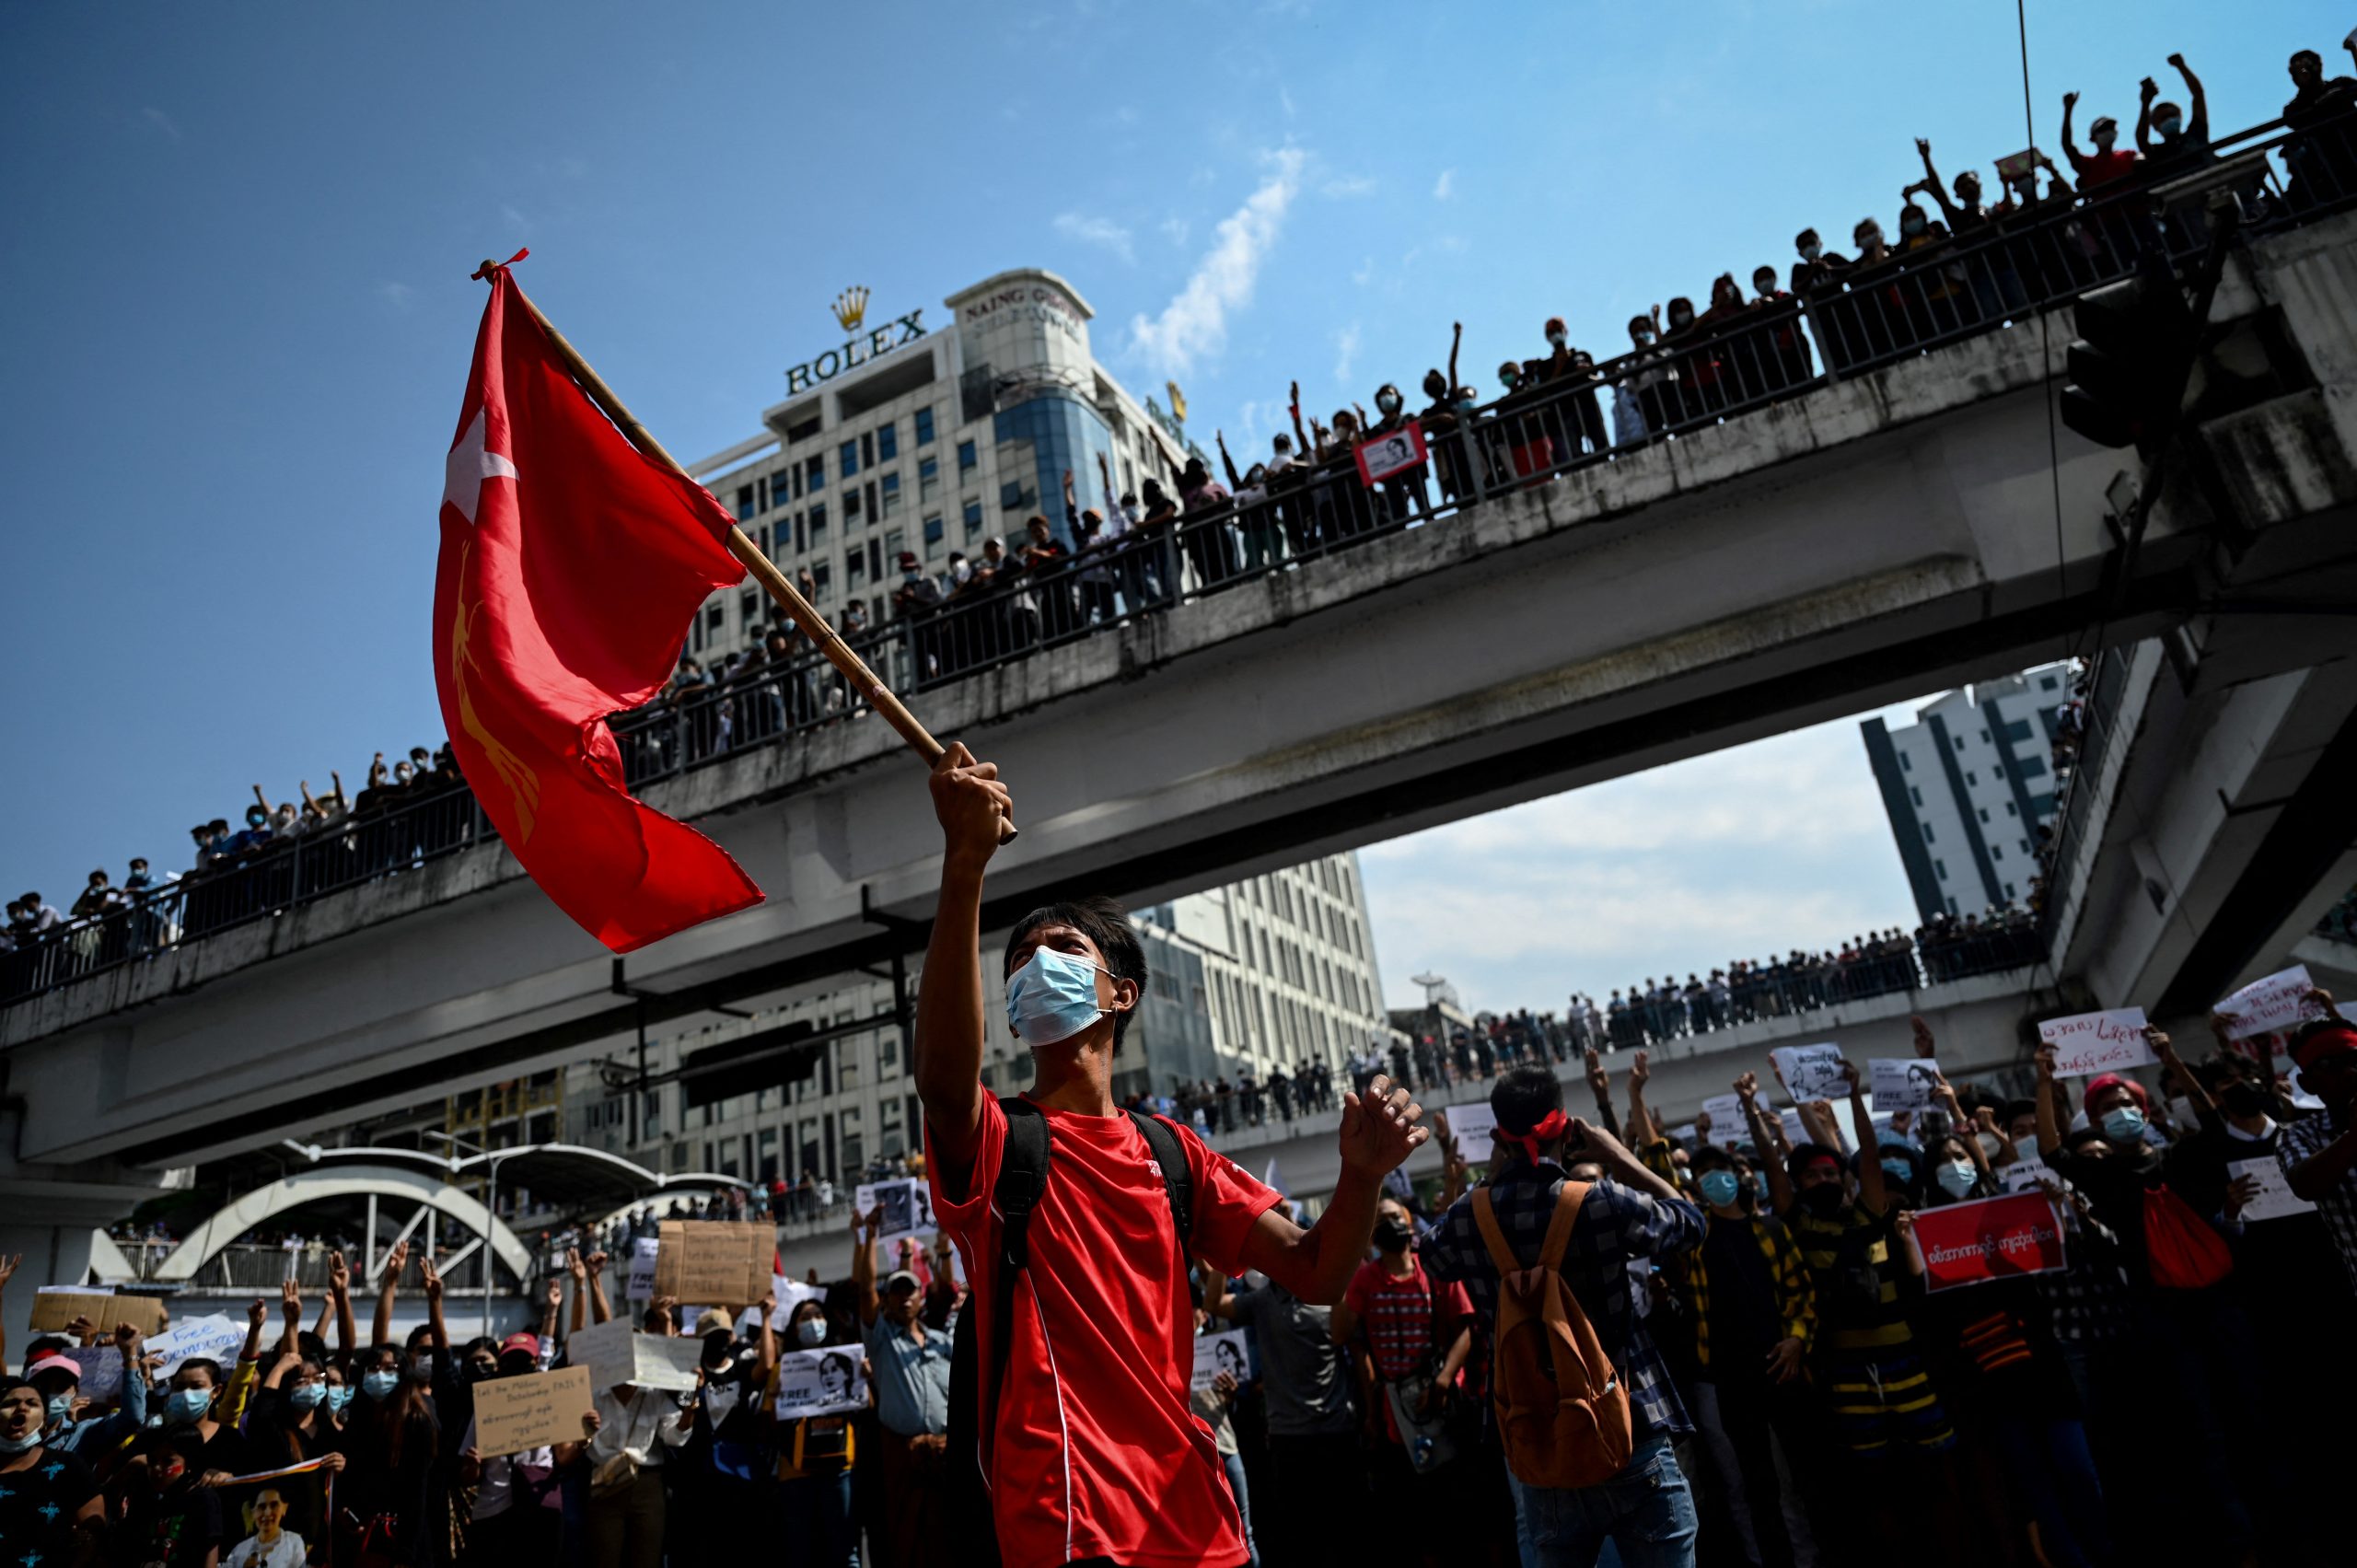 Protesters gather to demonstrate against the February 1 military coup, in downtown Yangon on February 8, 2021. (AFP)